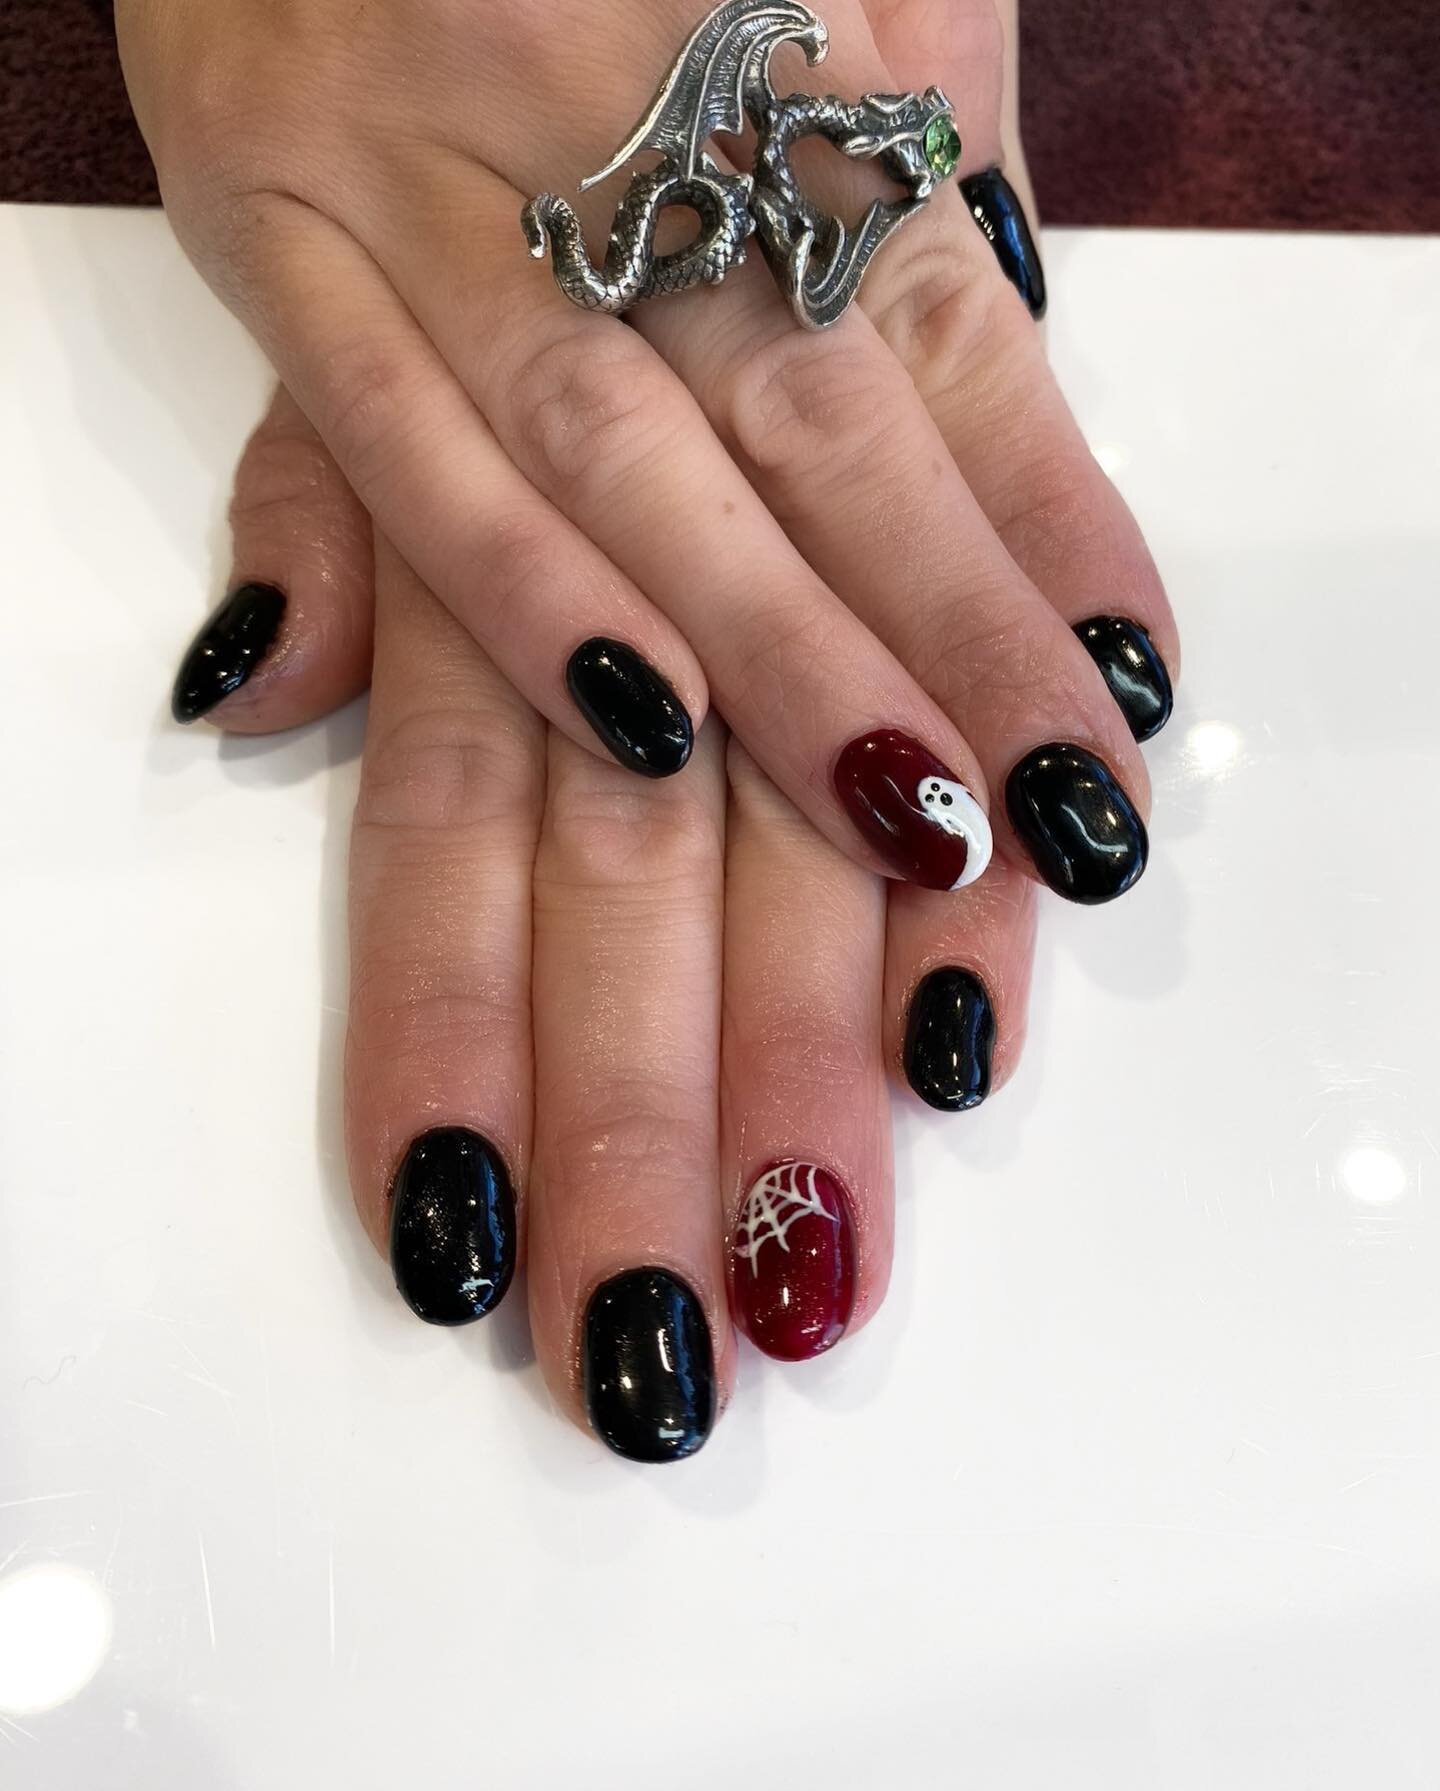 Feeling spooky and fun this Halloween? 🎃👻 if so have you got your nail appointment booked in? &hellip;

&hellip;We are loving the nail art request for Halloween , this was created by the very talented Shannon, all free hand may I add 🙌🏼 either DM